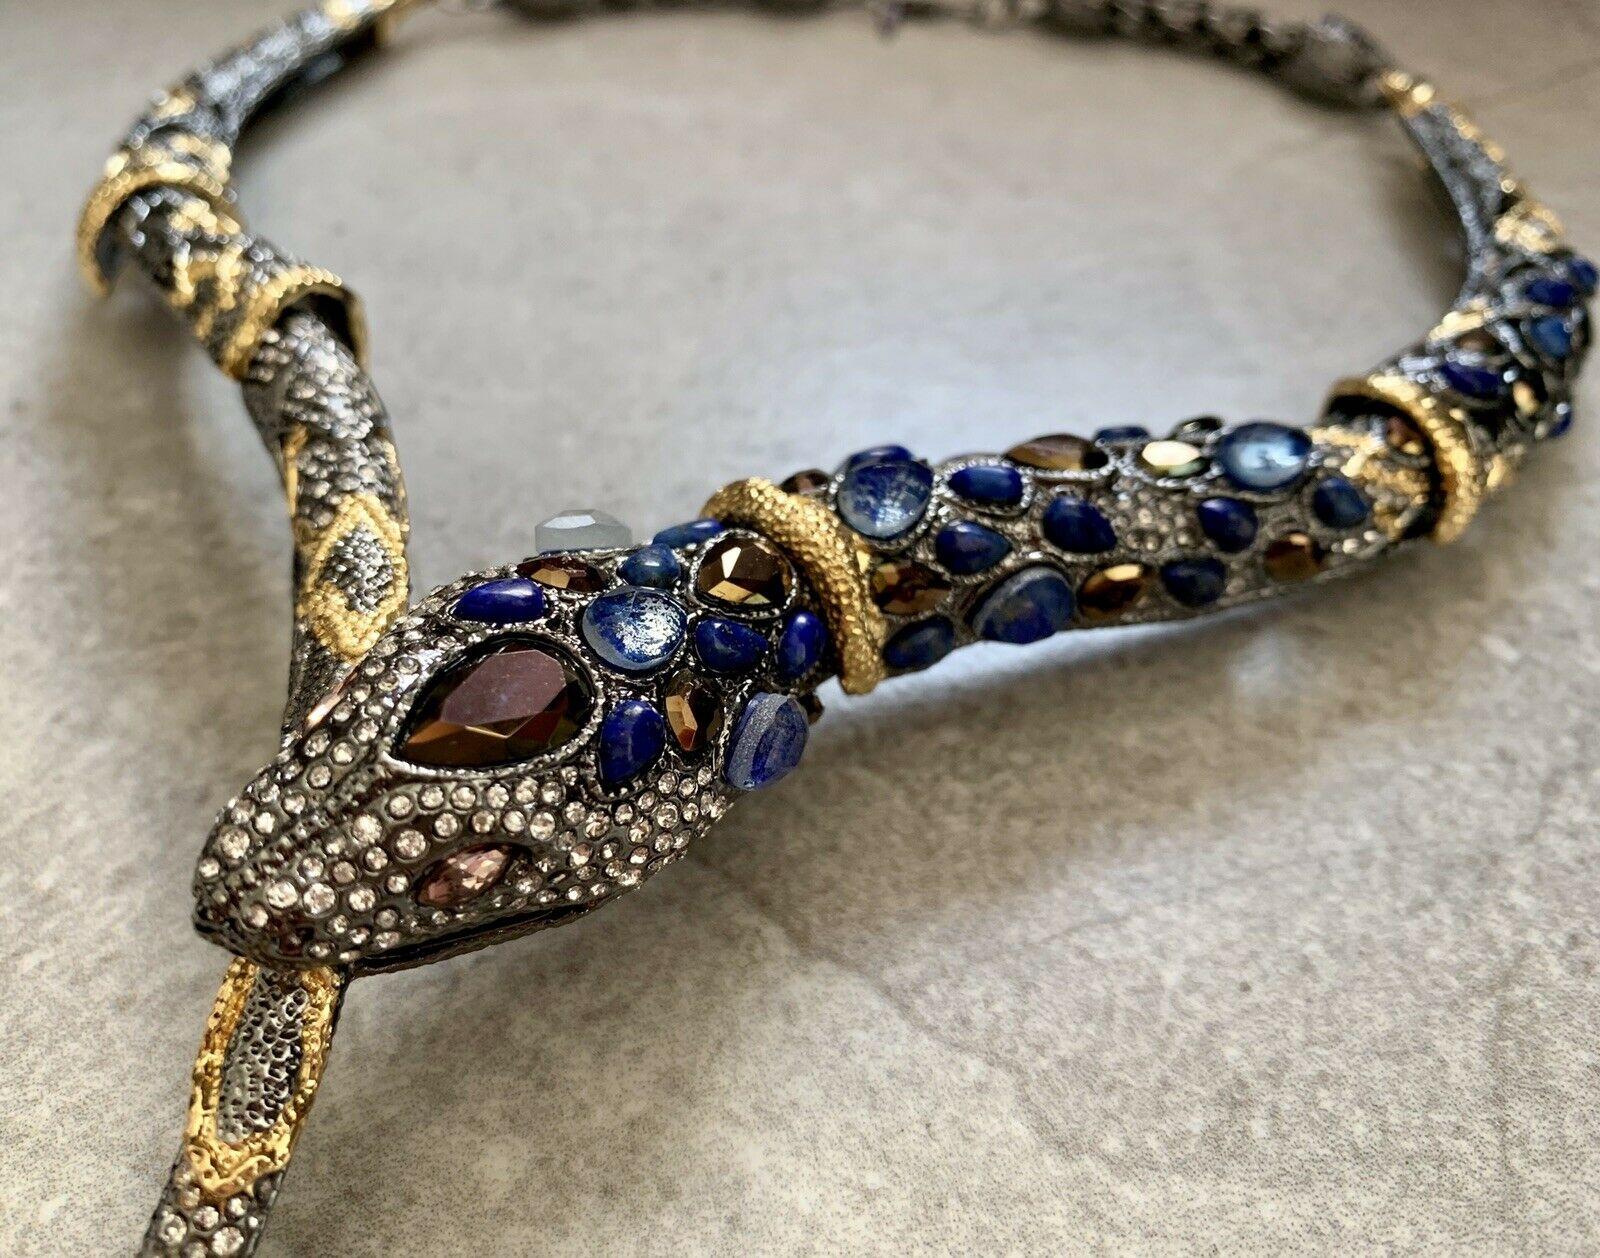 Stunning Exotic Jardin de Papillon Snake Serpent Necklace by Alexis Bittar.  Encrusted with sparkling Teardrop Blue, Brown and round Crystals inter-spaced with gold gilt accents. Approx. 18